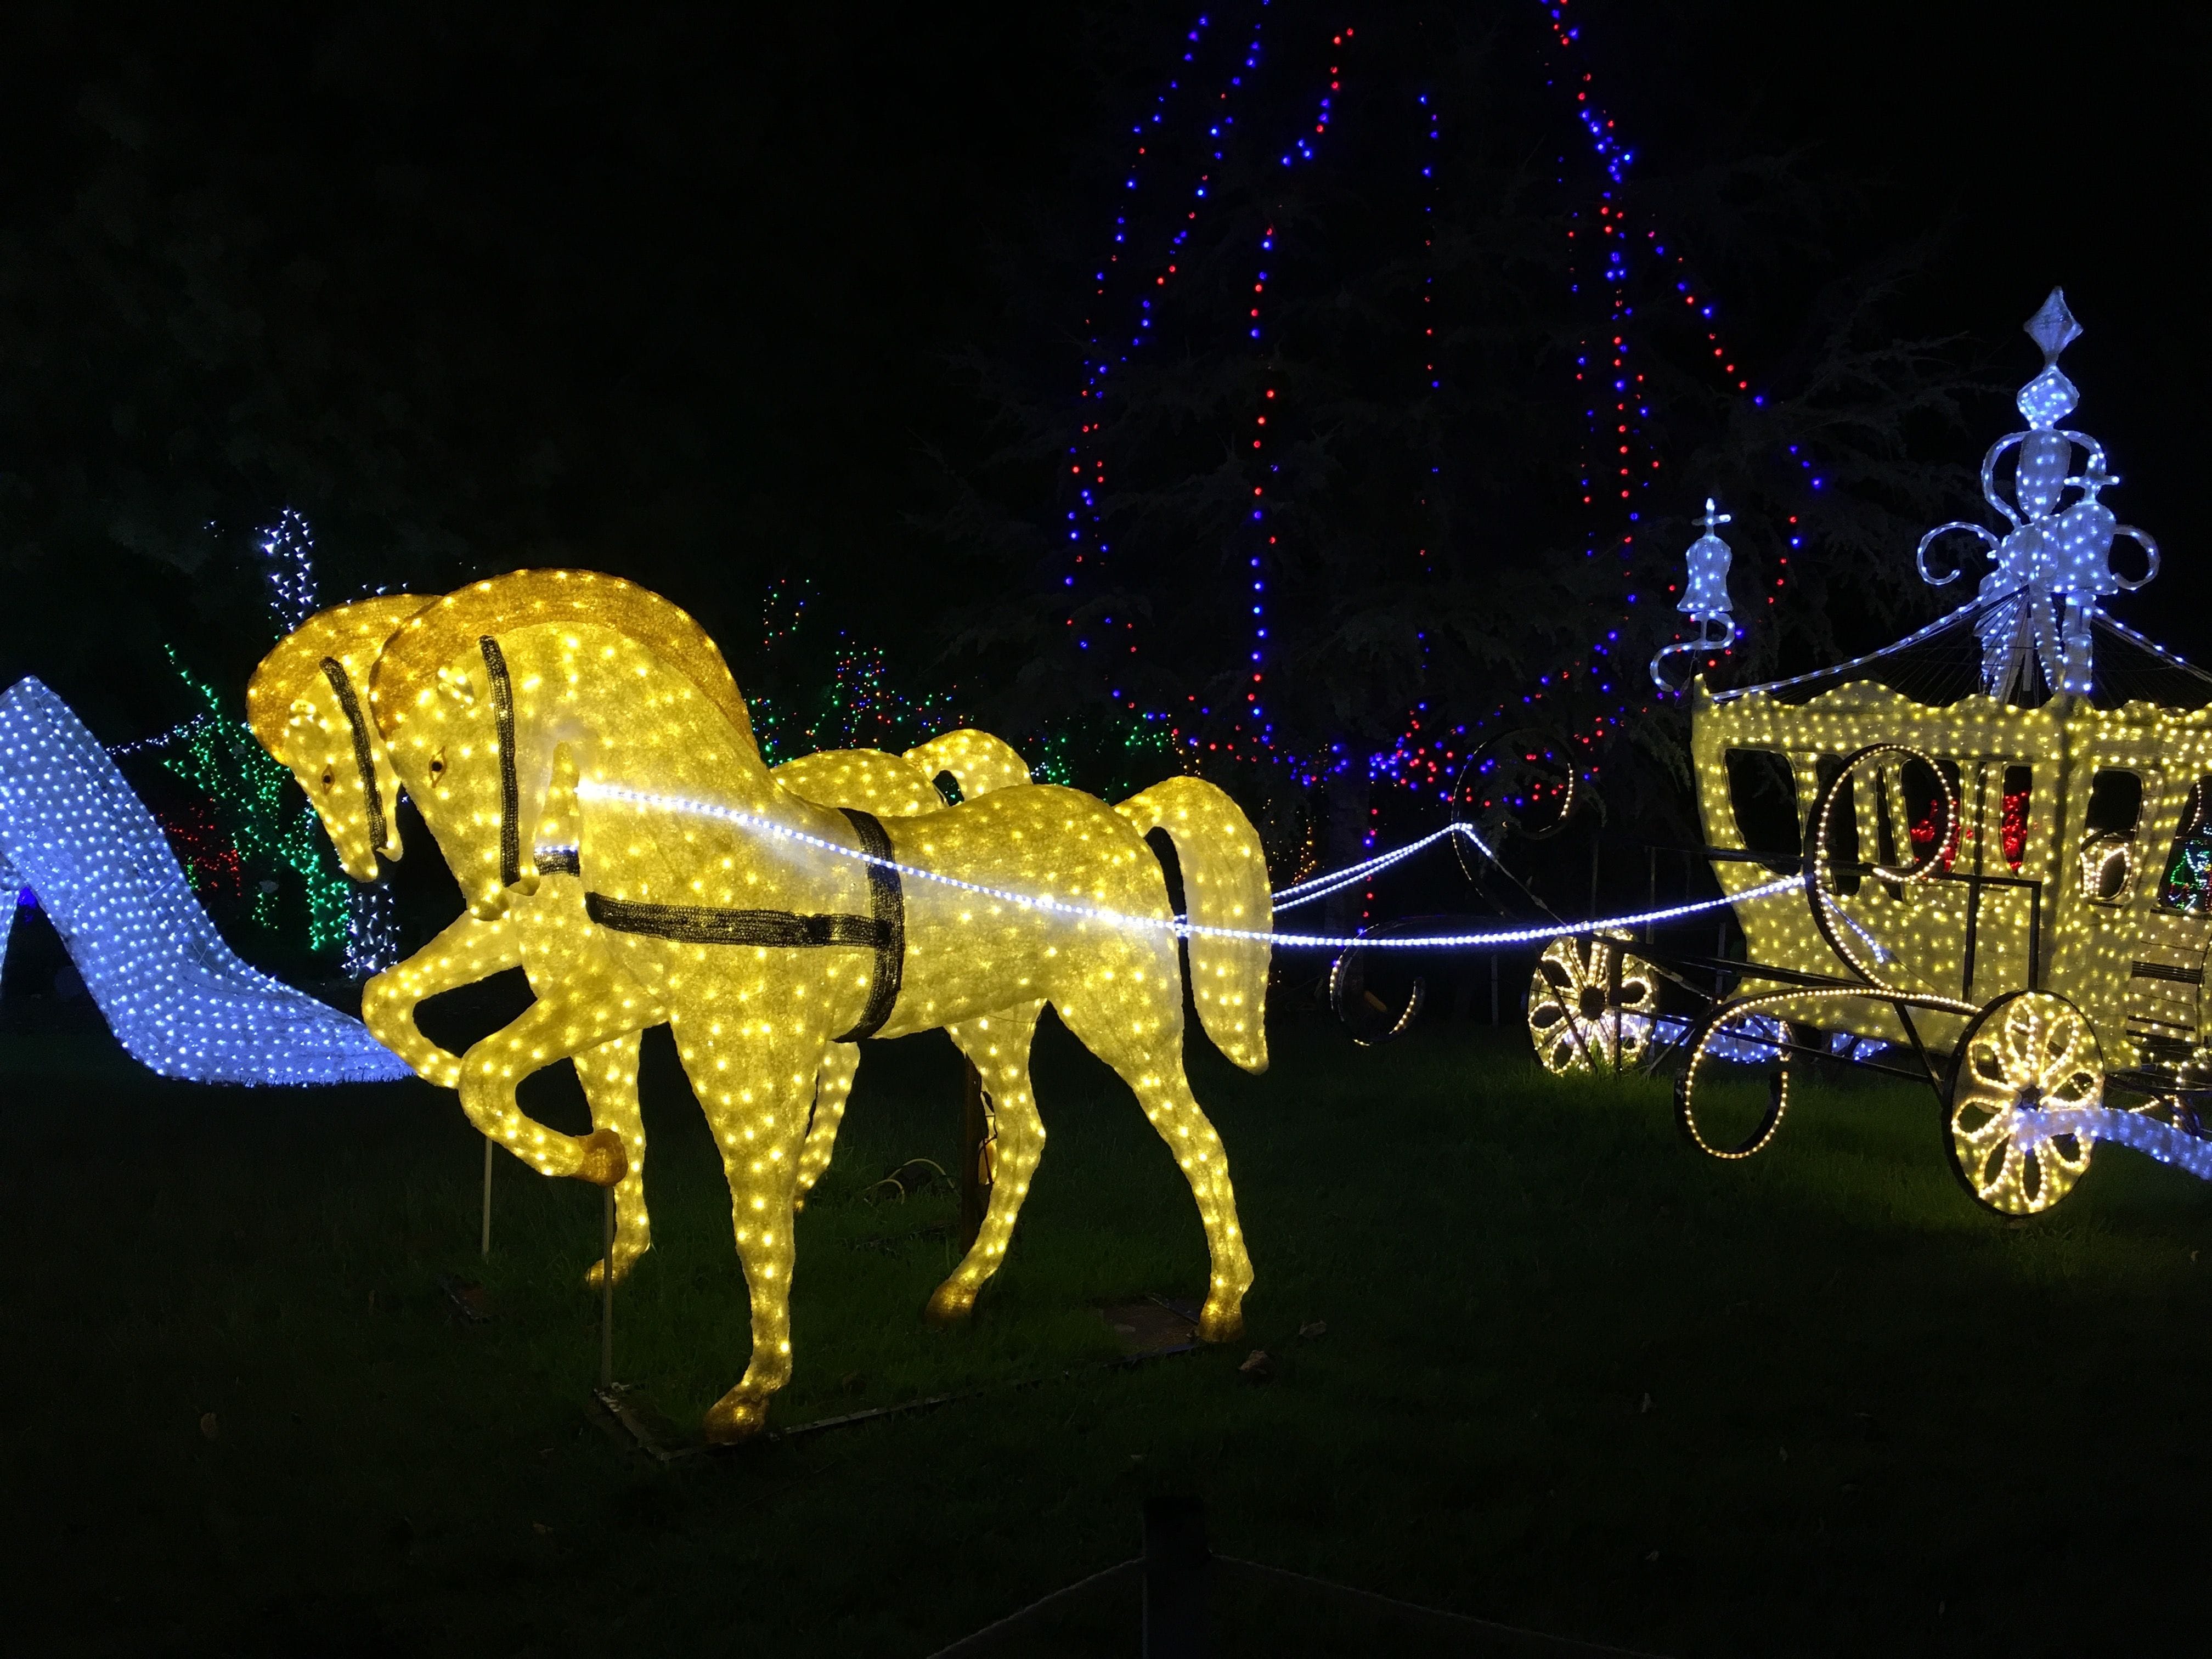 Hunter Valley Gardens Christmas Lights 2018-2019 Public Day Night Tour Image -5c149f65aaad5